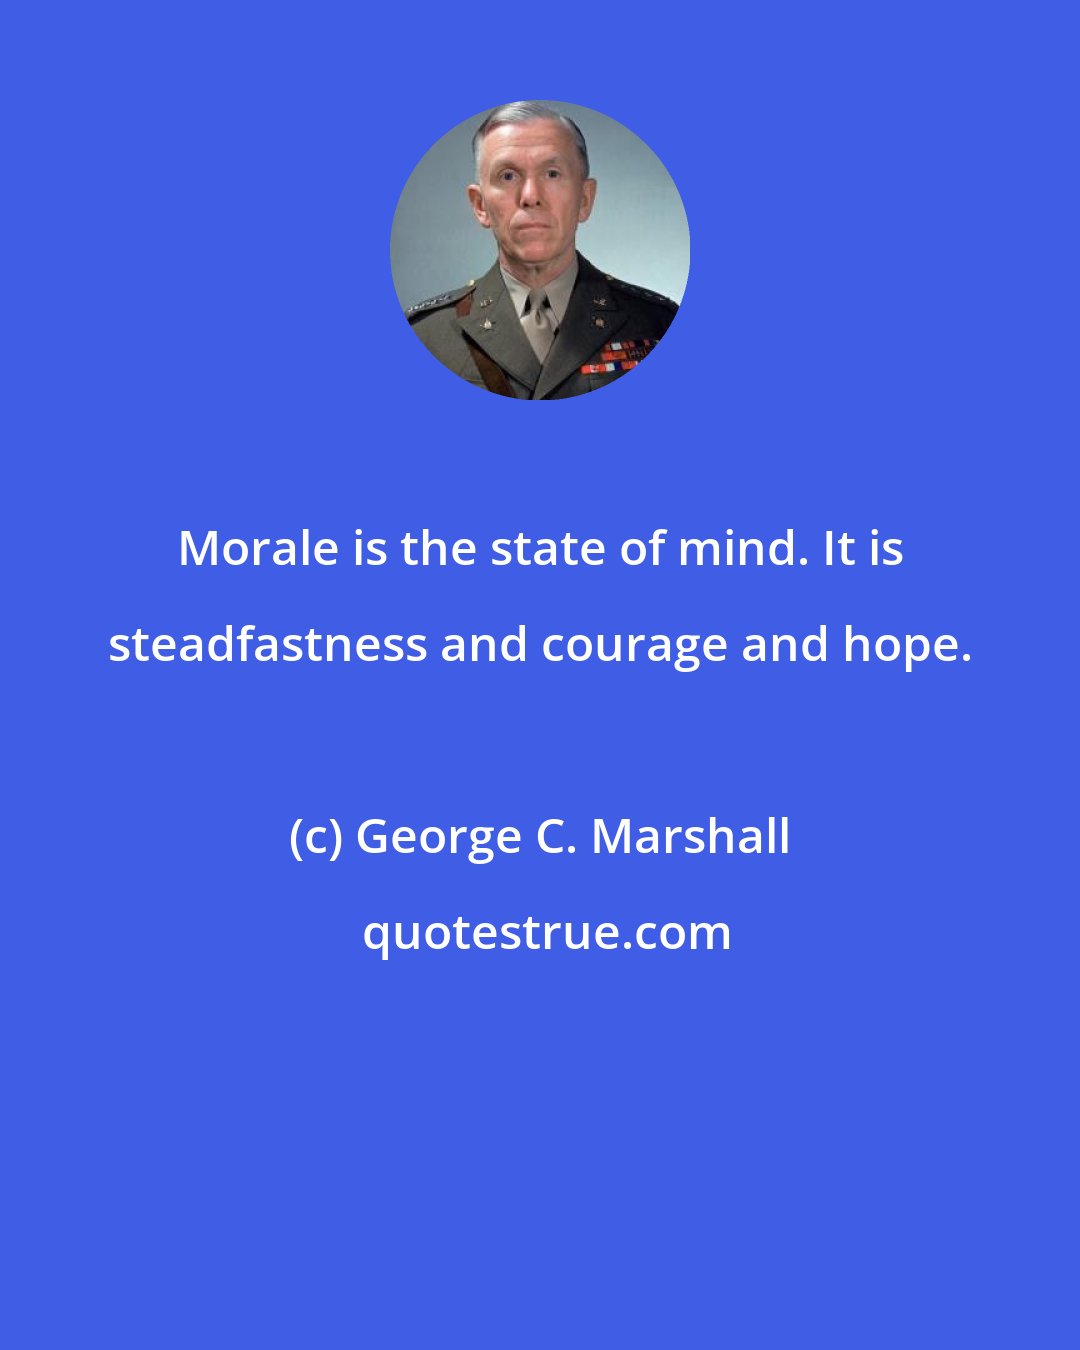 George C. Marshall: Morale is the state of mind. It is steadfastness and courage and hope.